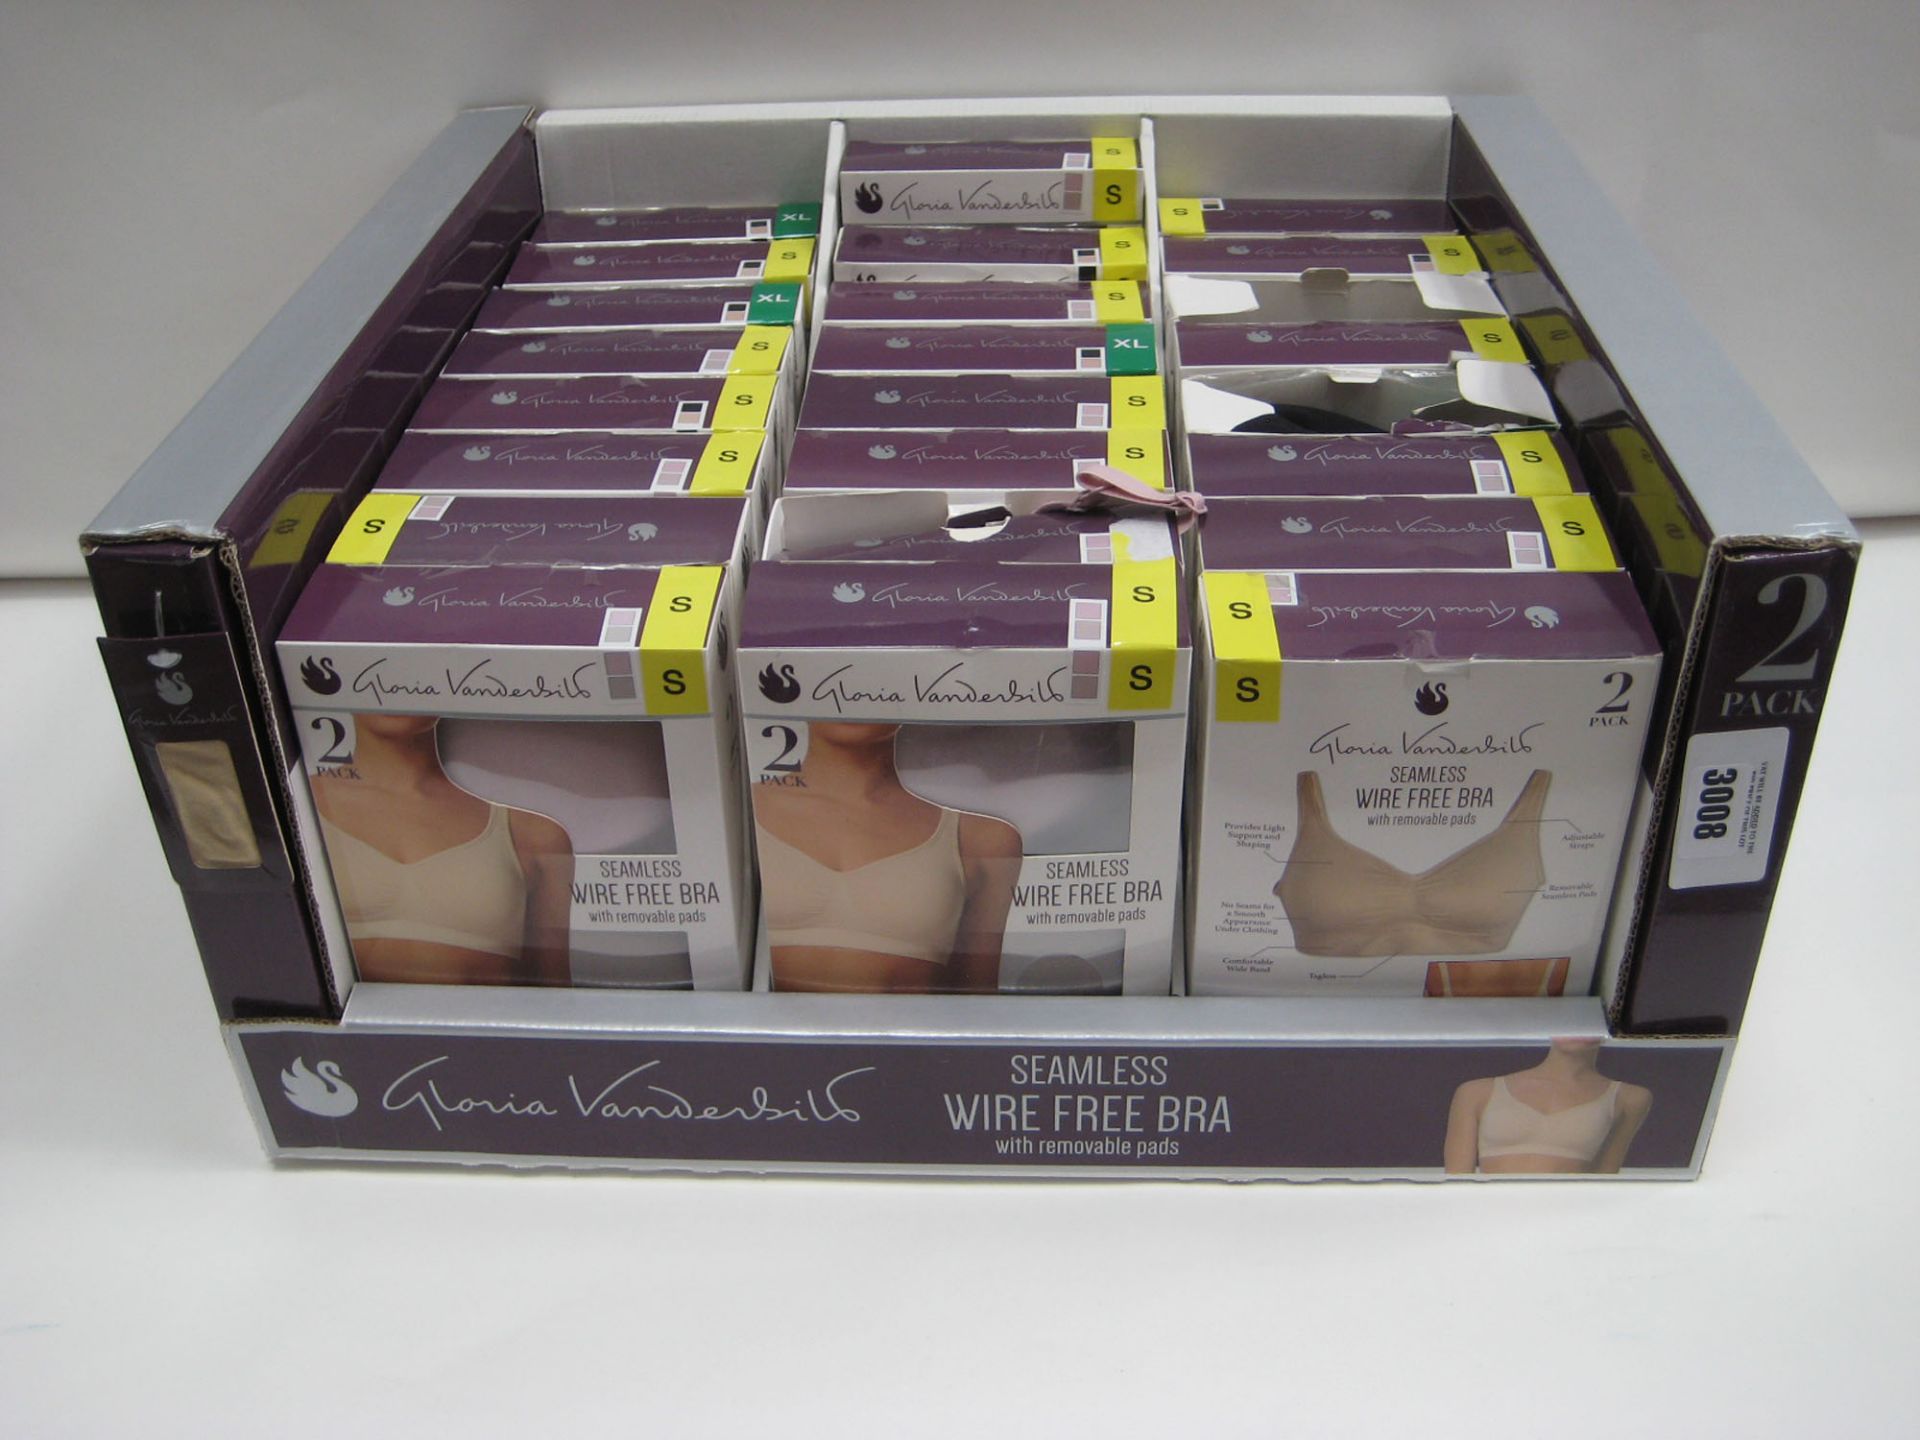 Box containing approx 24 twin pack seamless wire free bras by Claudia Vanderbilt